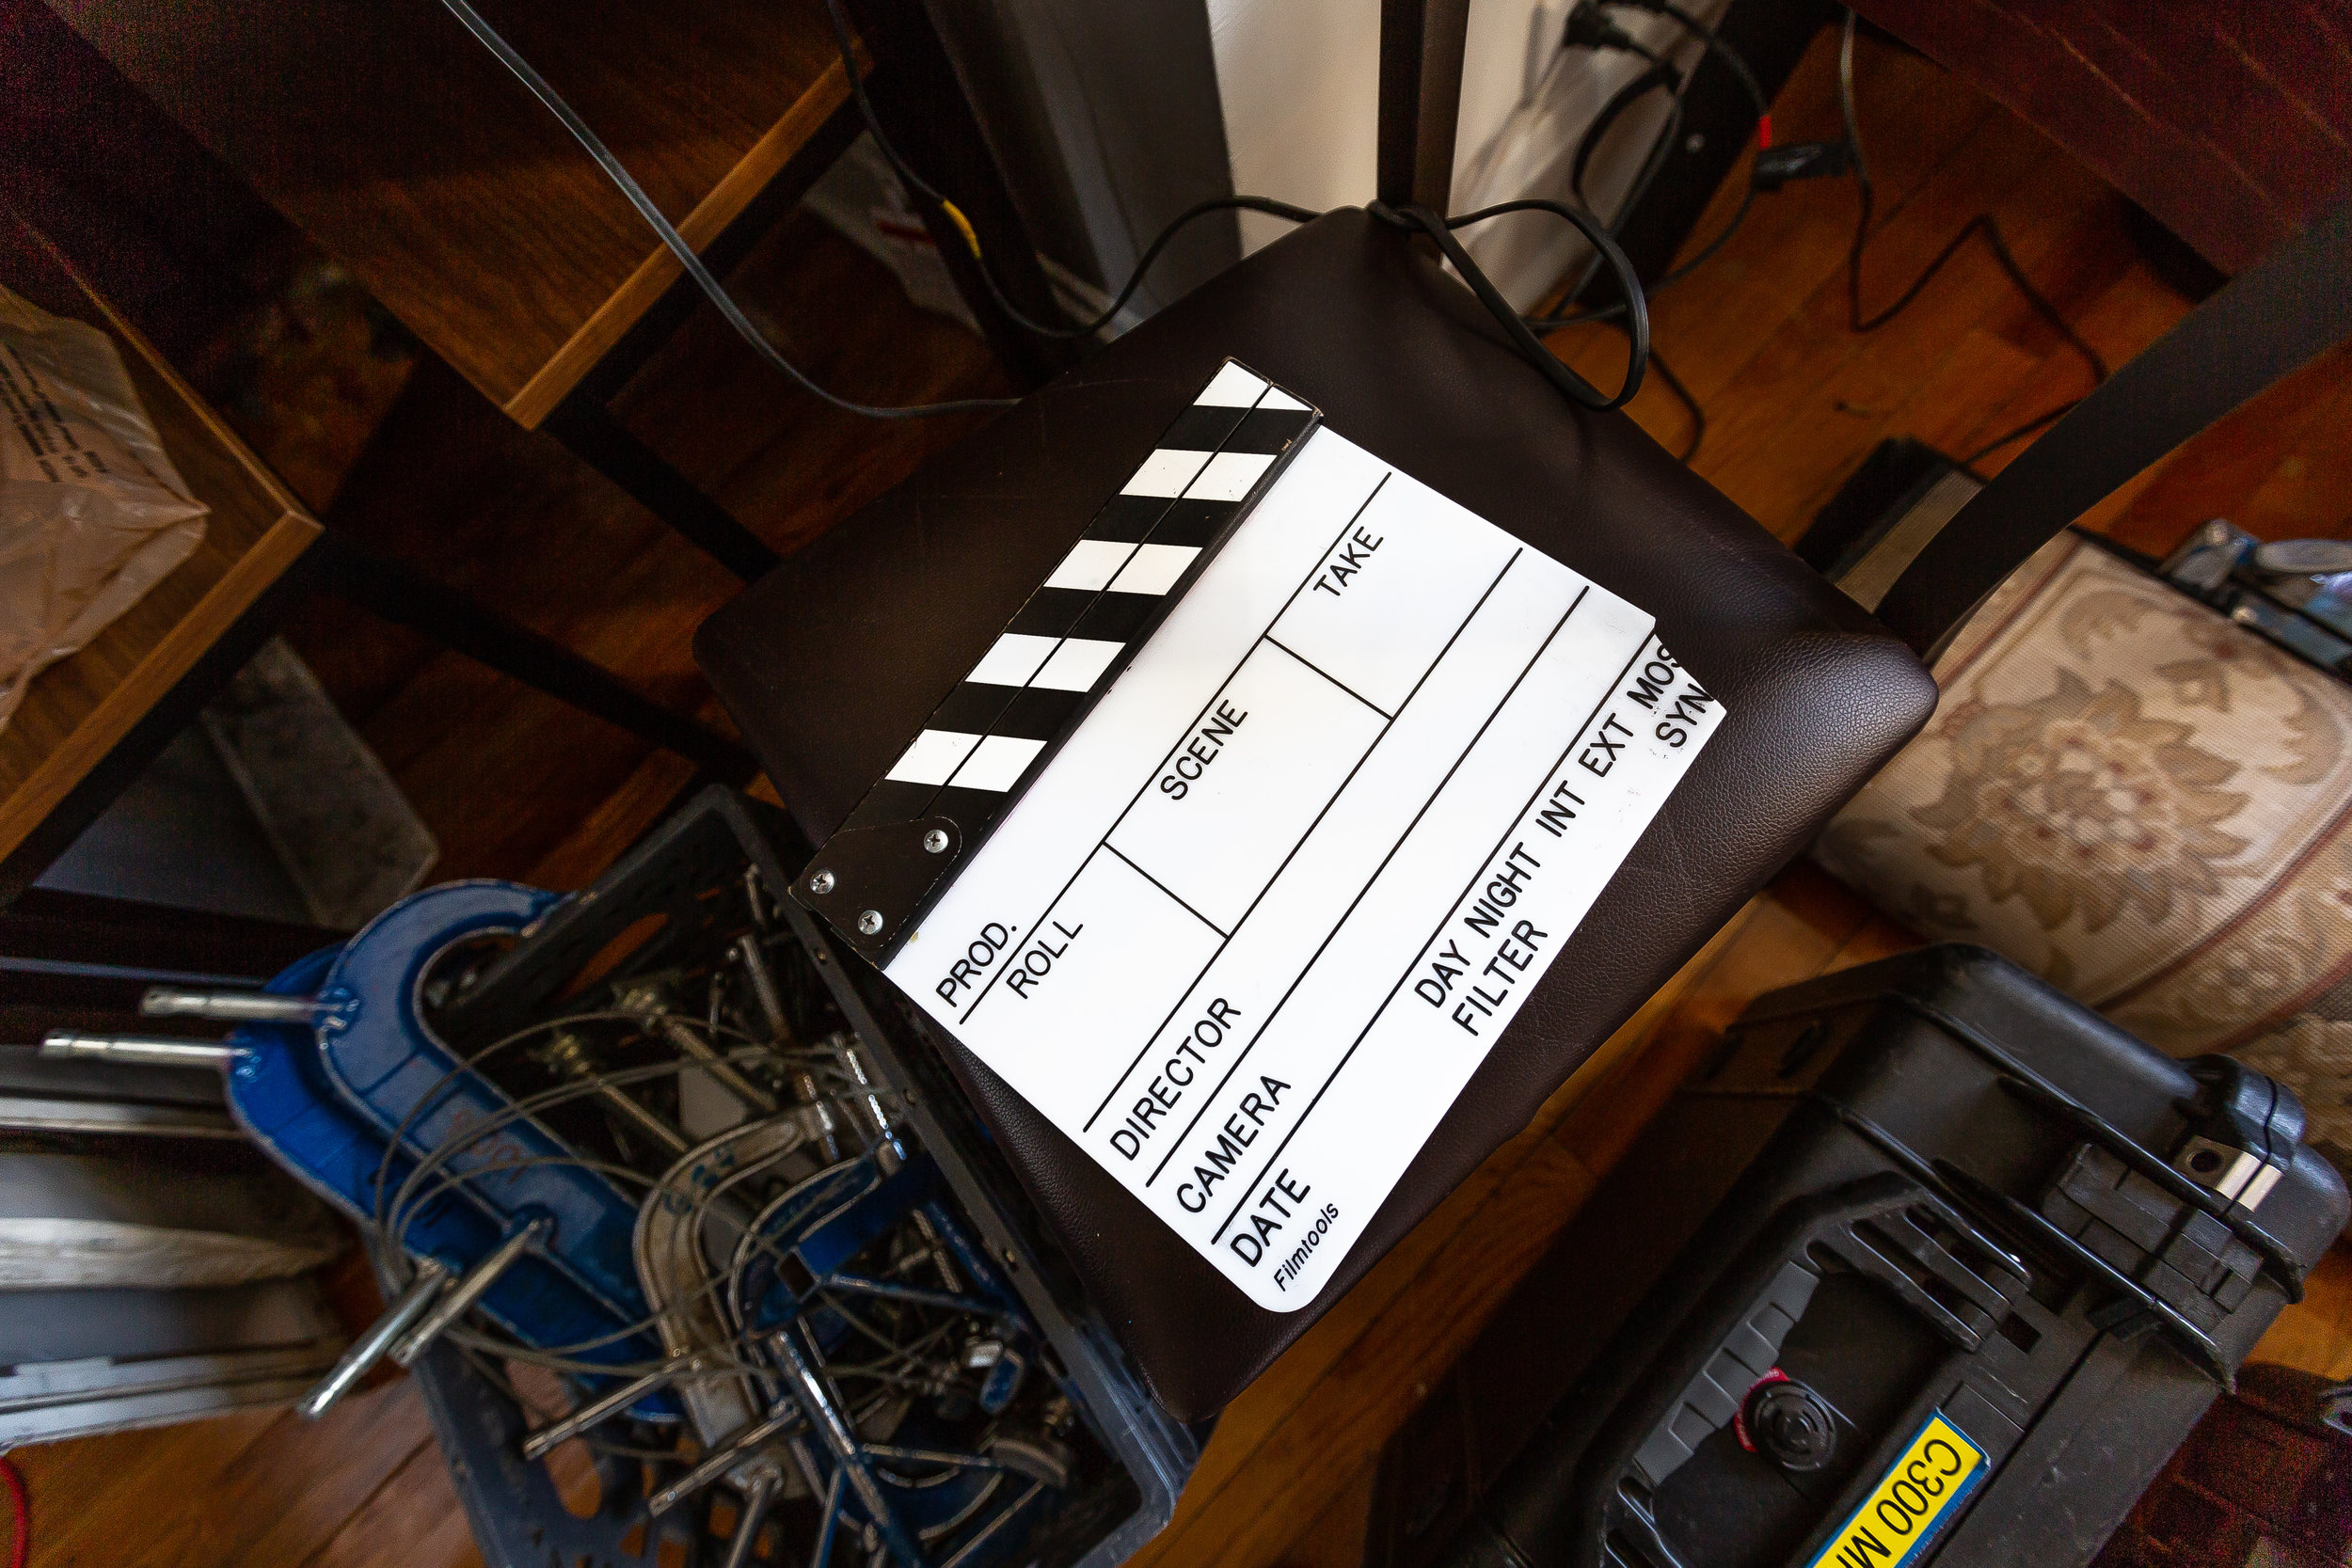 Behind the Scene Photograph of the film slate by Chicago Set Photographer Rashad Anabtawi